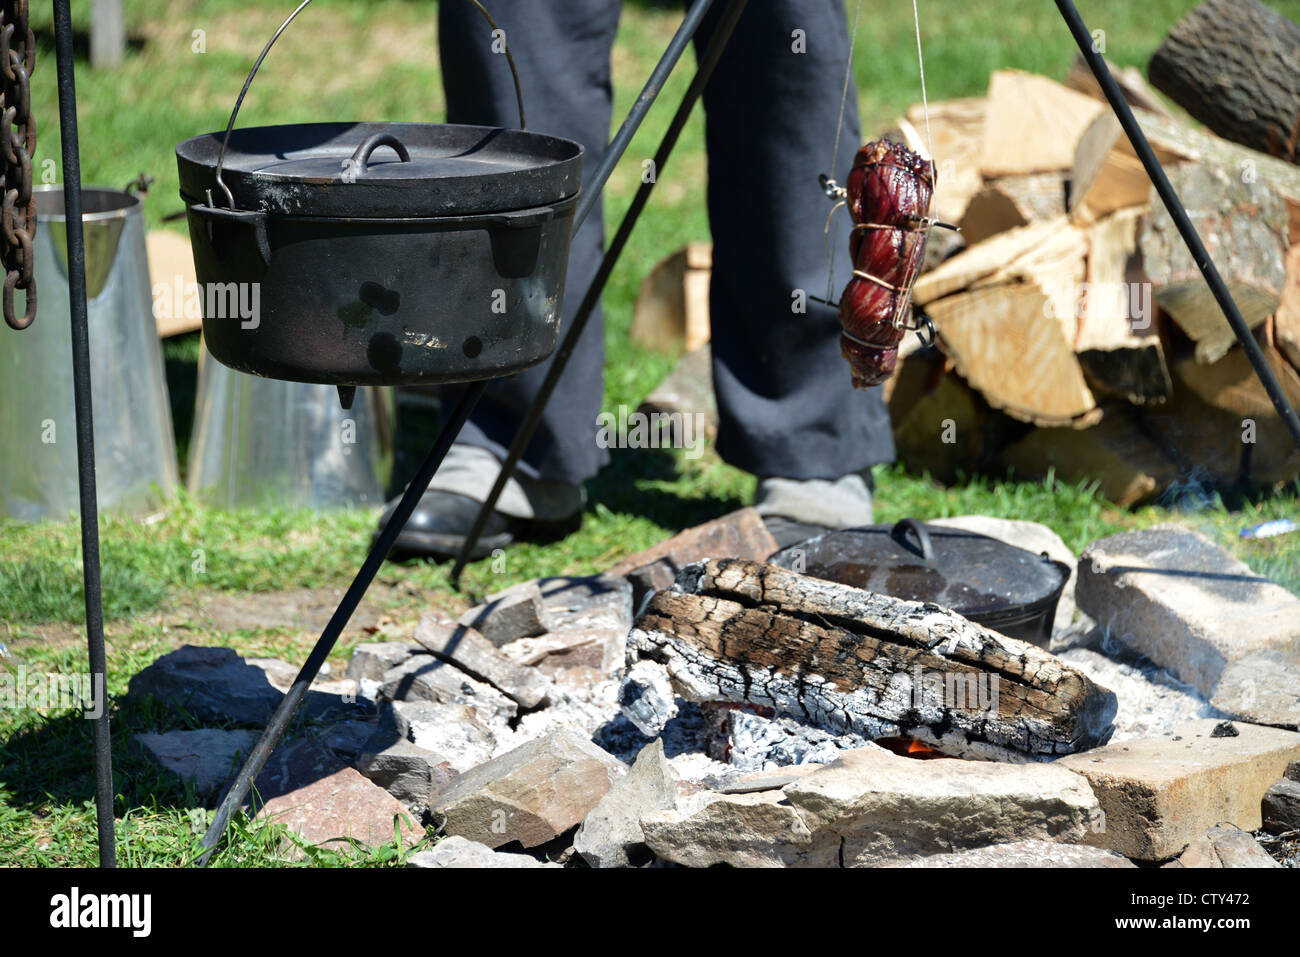 This is an image of a man cooking with traditional cookware from the War of 1812 at Fort York national historical site, Toronto. Stock Photo